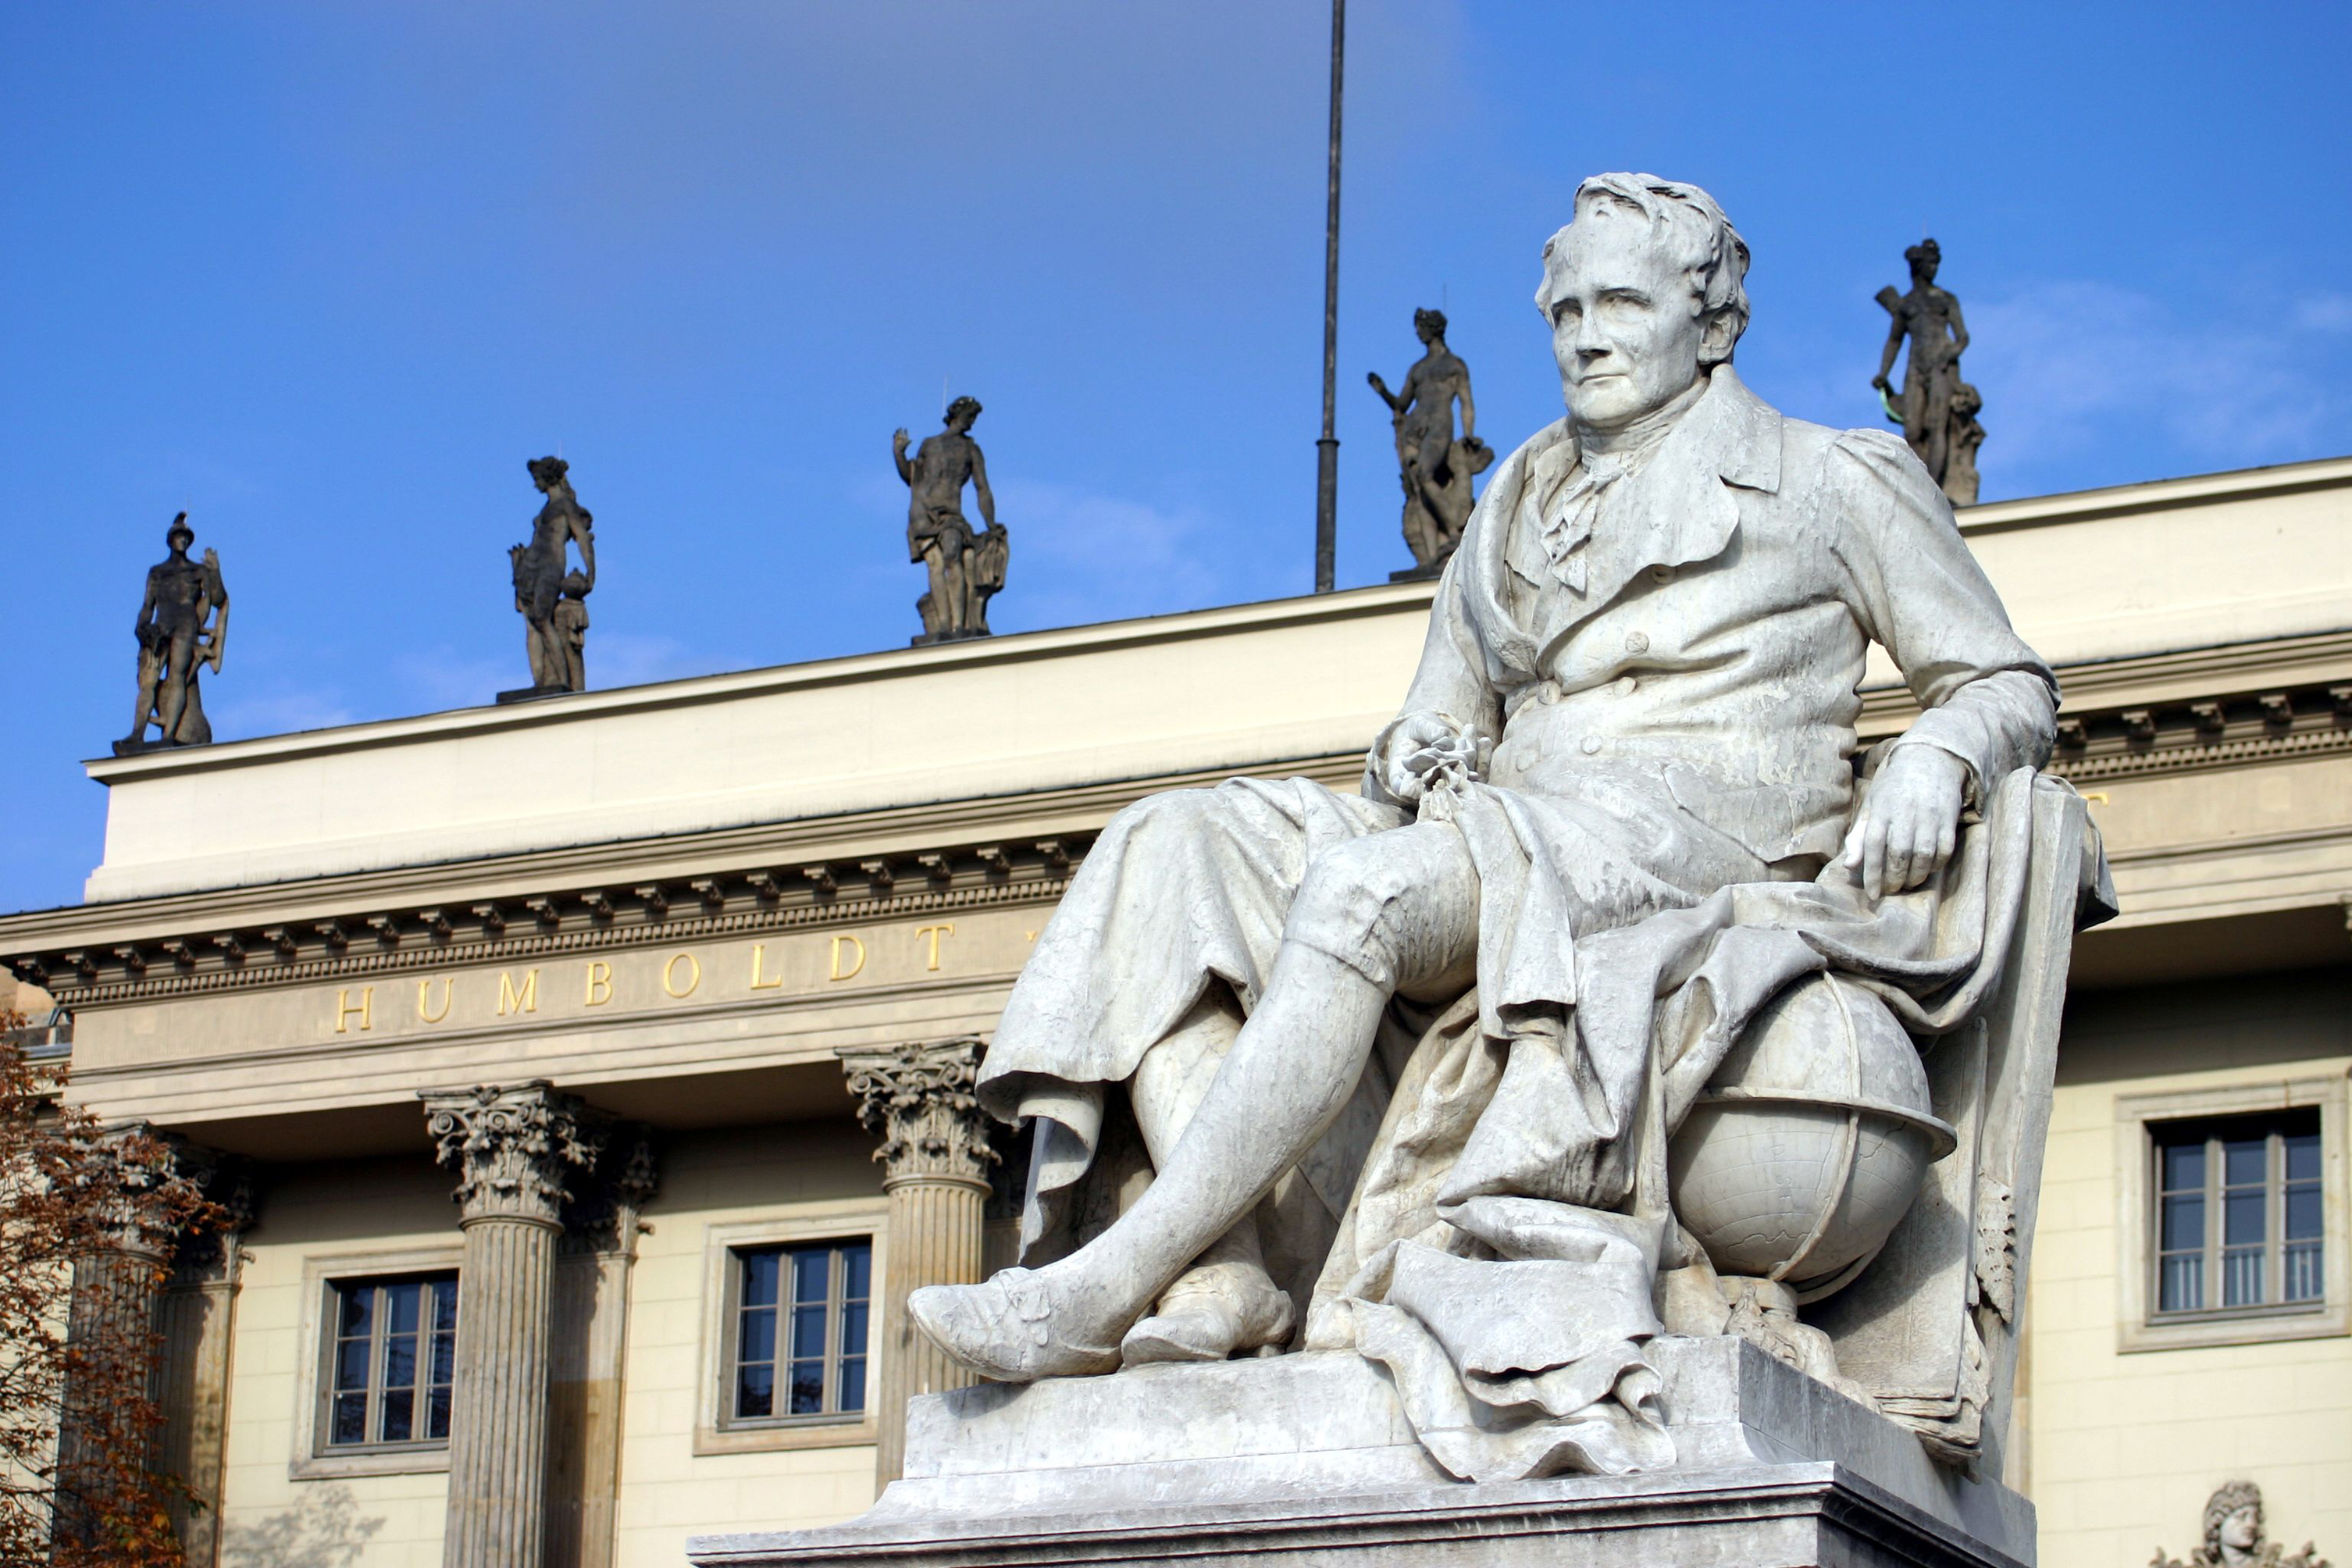 Monument to Alexander von Humboldt in front of the main building